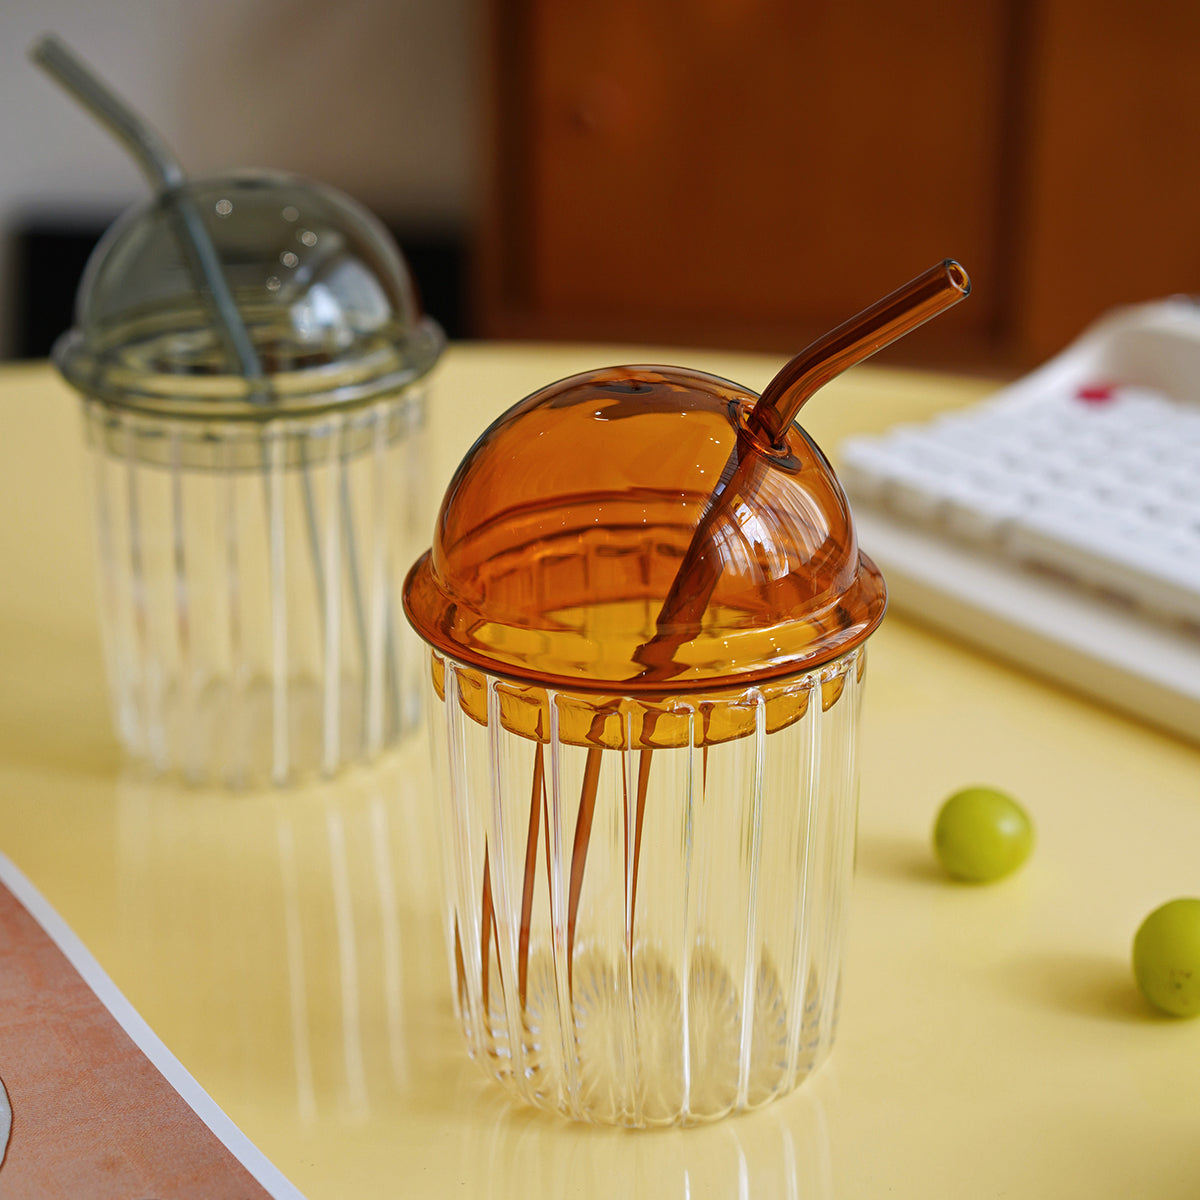 Drinking Glasses with Dome Lids and Glass Straw Can Shaped Glass